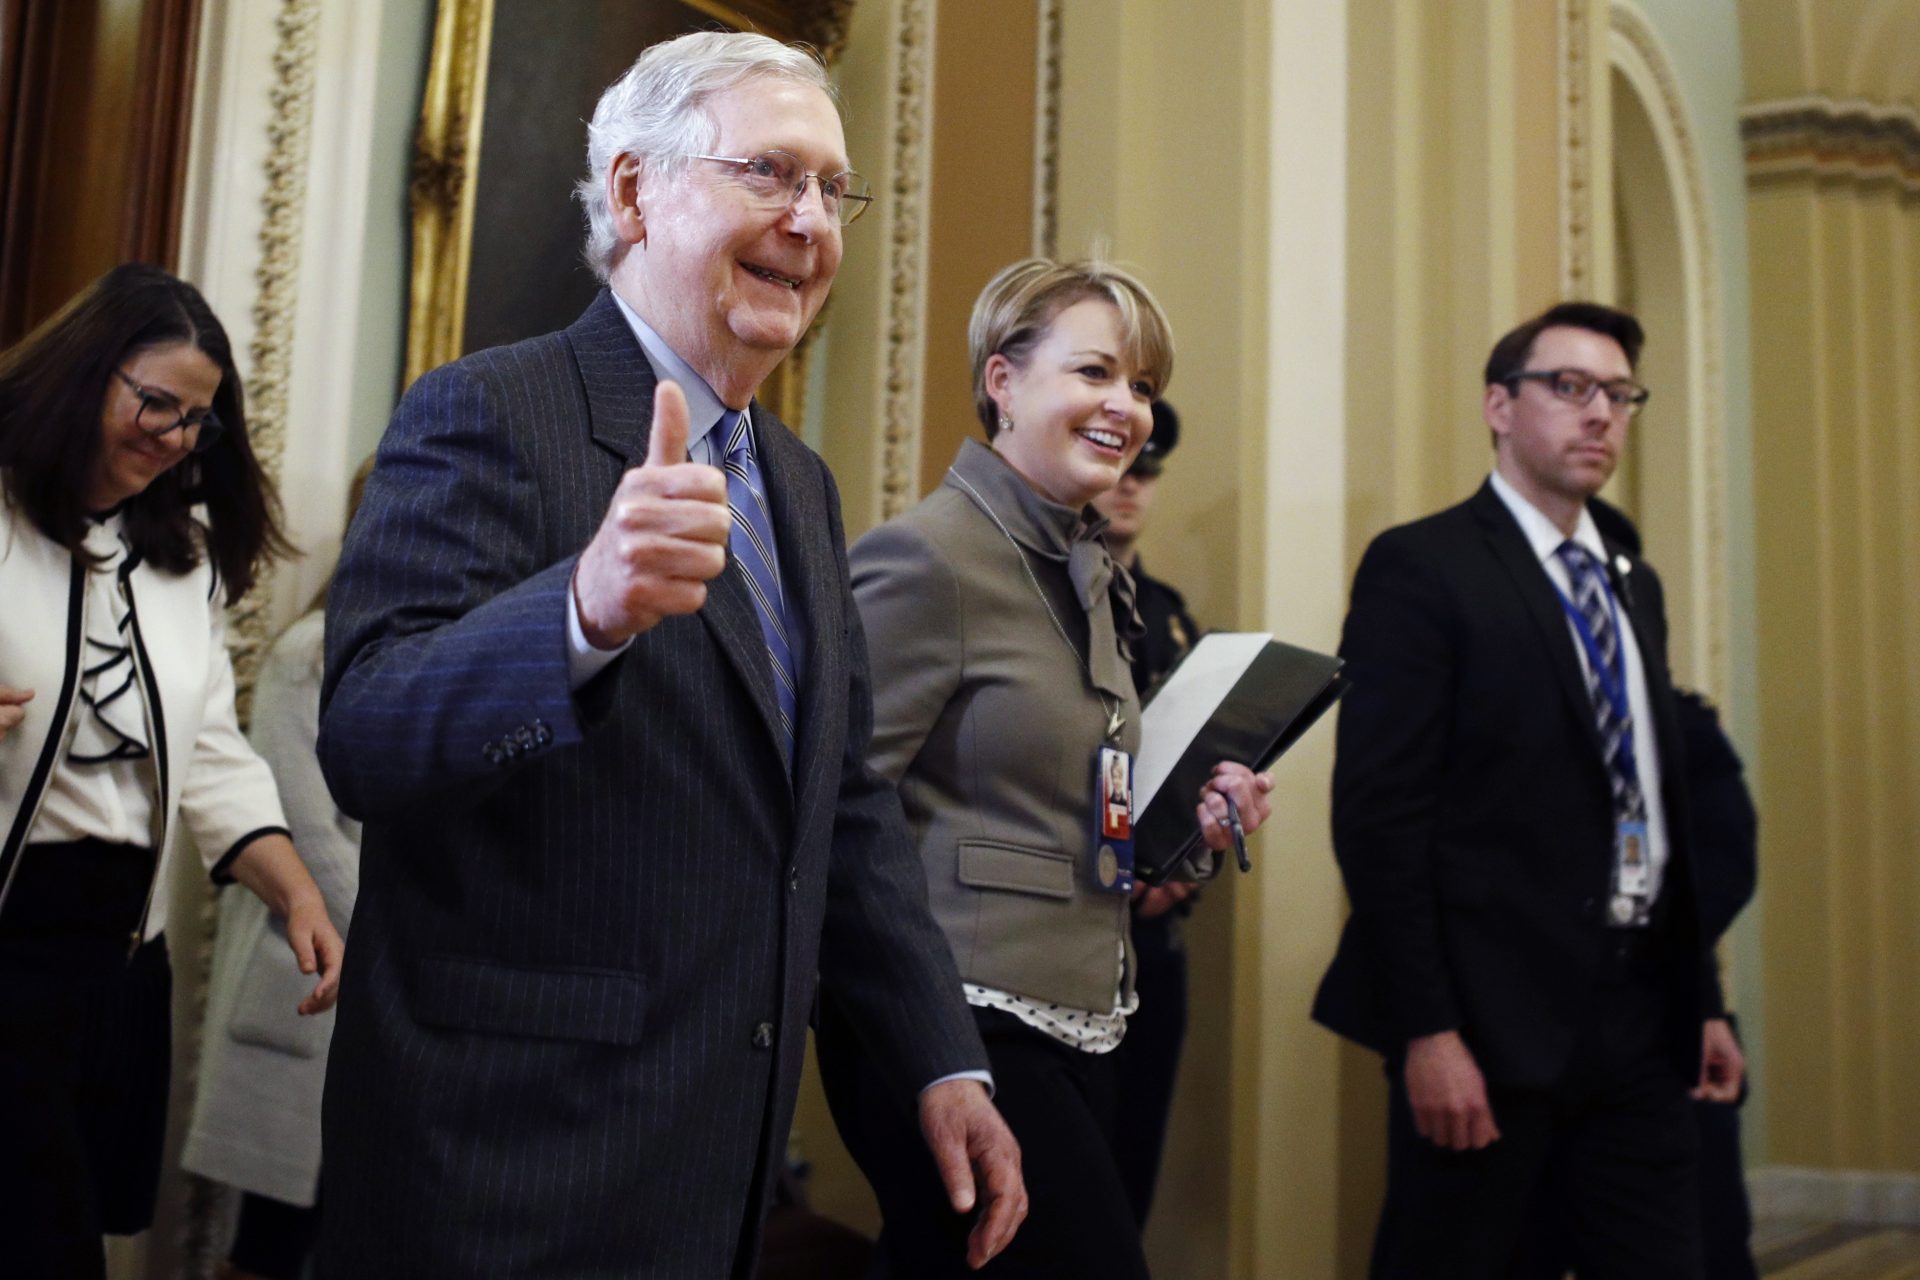 Senate Majority Leader Mitch McConnell, R-Ky., gives a thumbs-up as he leaves the Senate chamber during the impeachment trial of President Donald Trump at the Capitol, Friday, Jan. 31, 2020, in Washington.